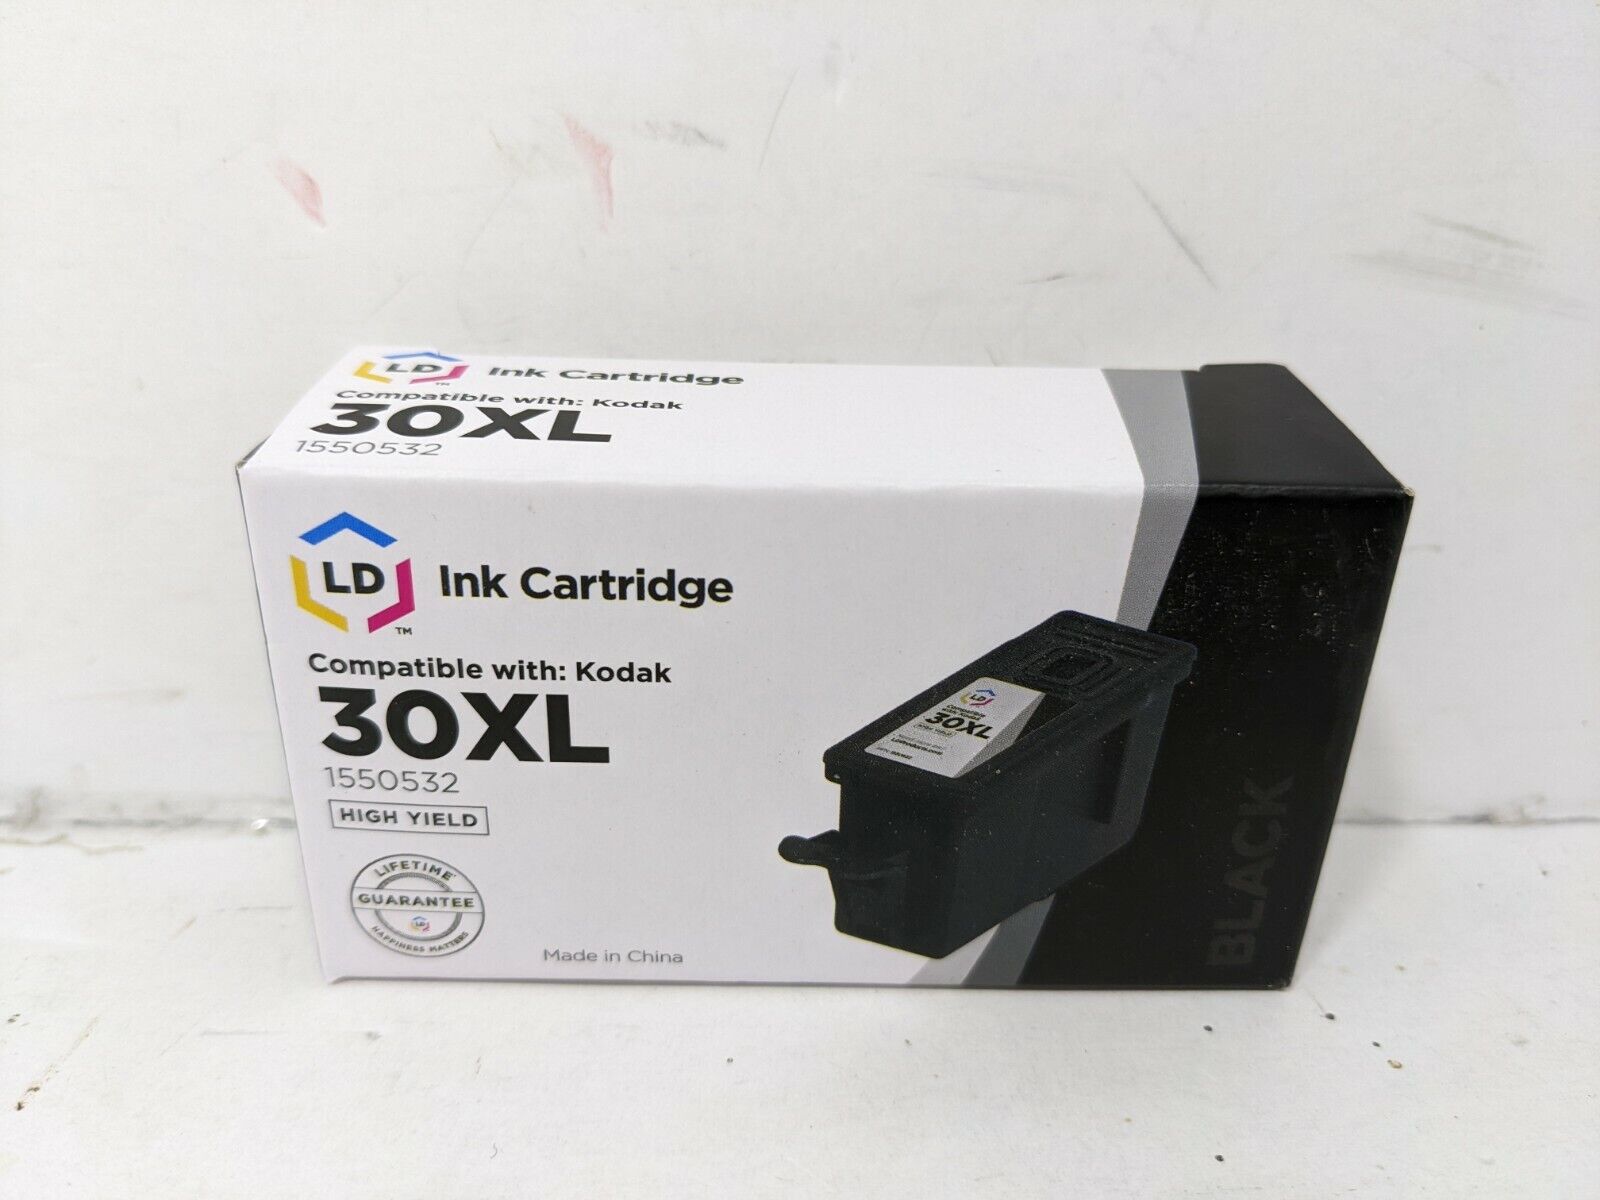 LD Products Ink Cartridge 30XL 1550532 Black - Brand New 